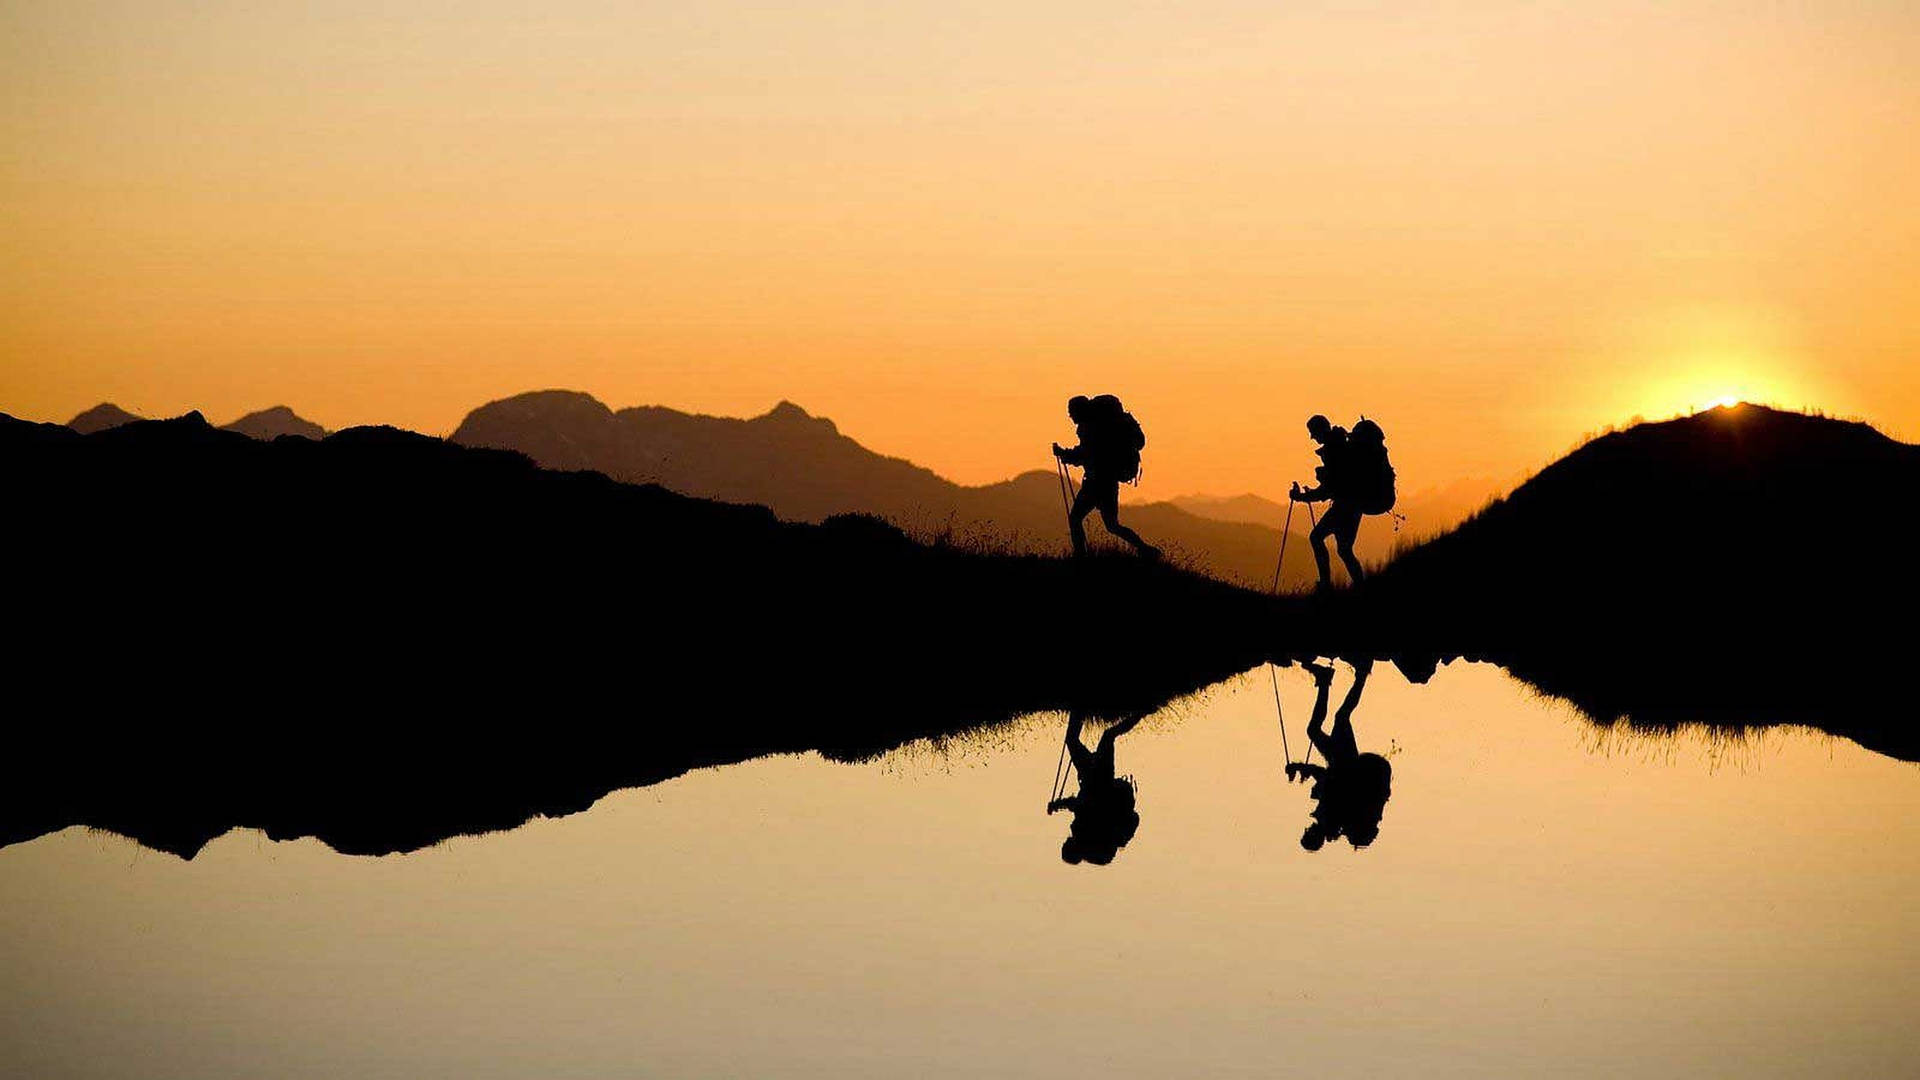 Hiking Silhouette Reflection Wallpaper